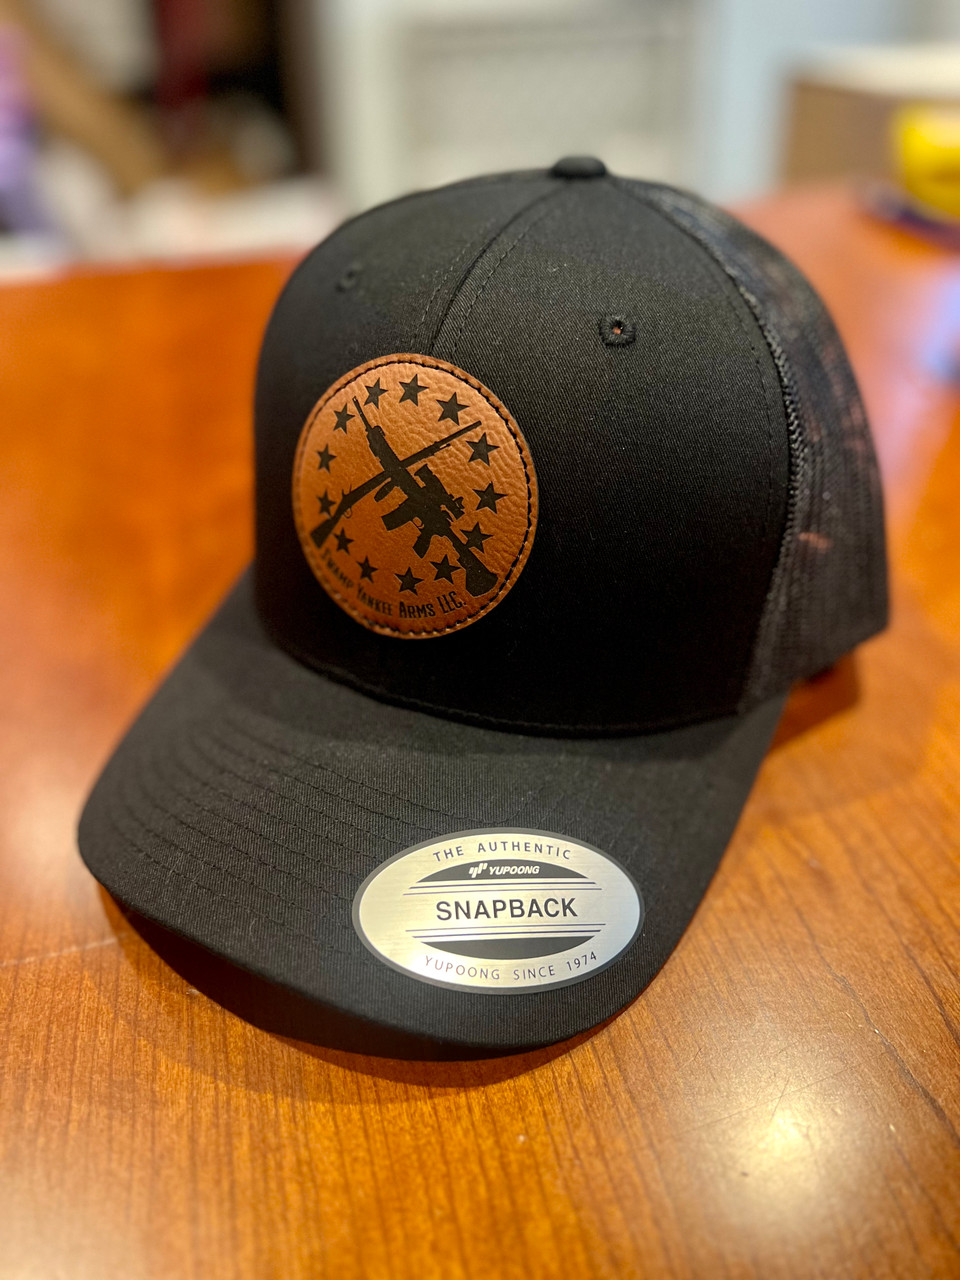 Swamp Yankee Arms Patch Snapback Hat